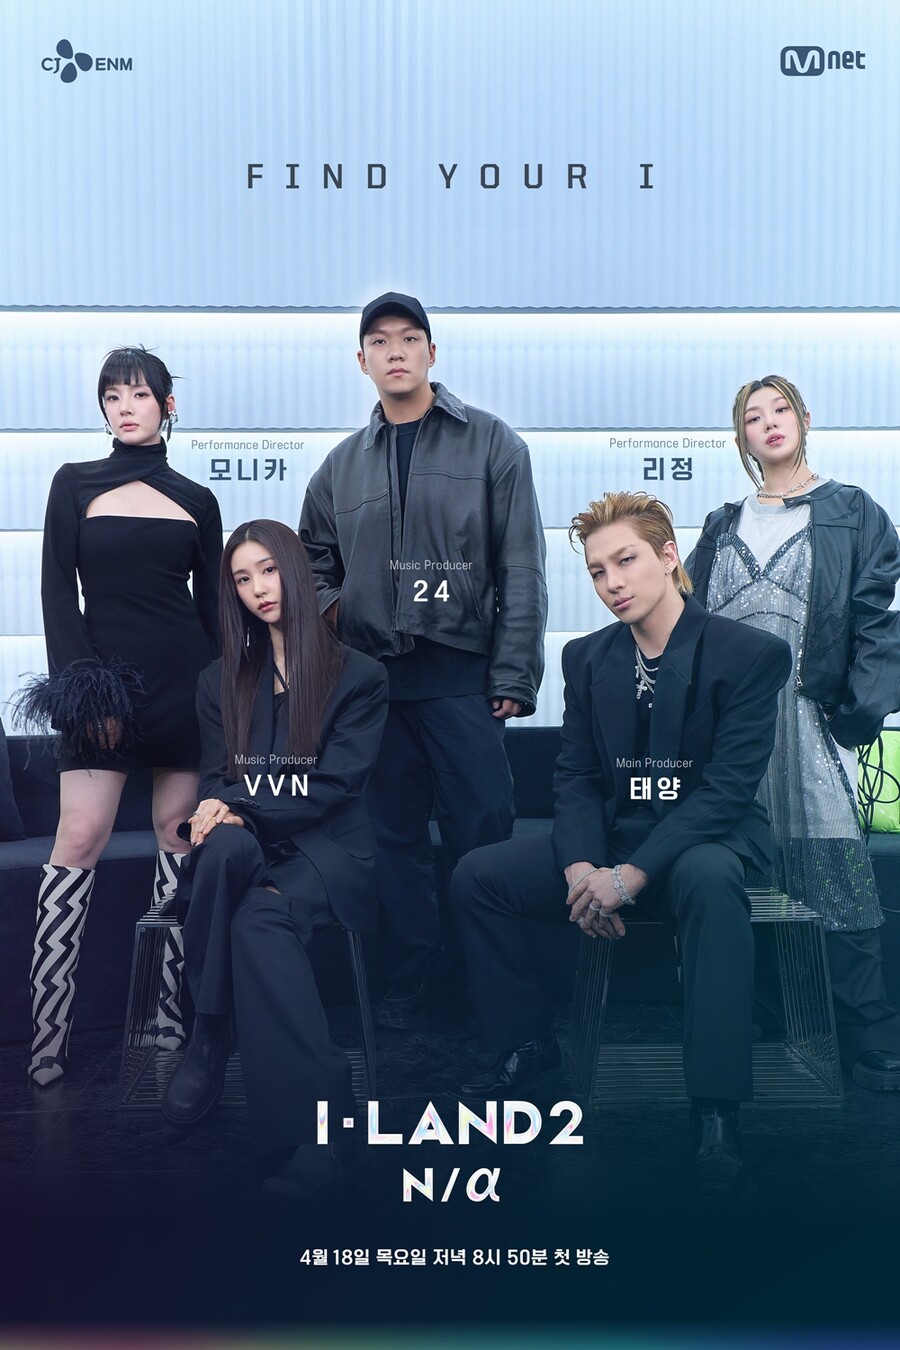 Watch: “I-LAND 2 : N/a” Announces Producer And Performance Director Lineup